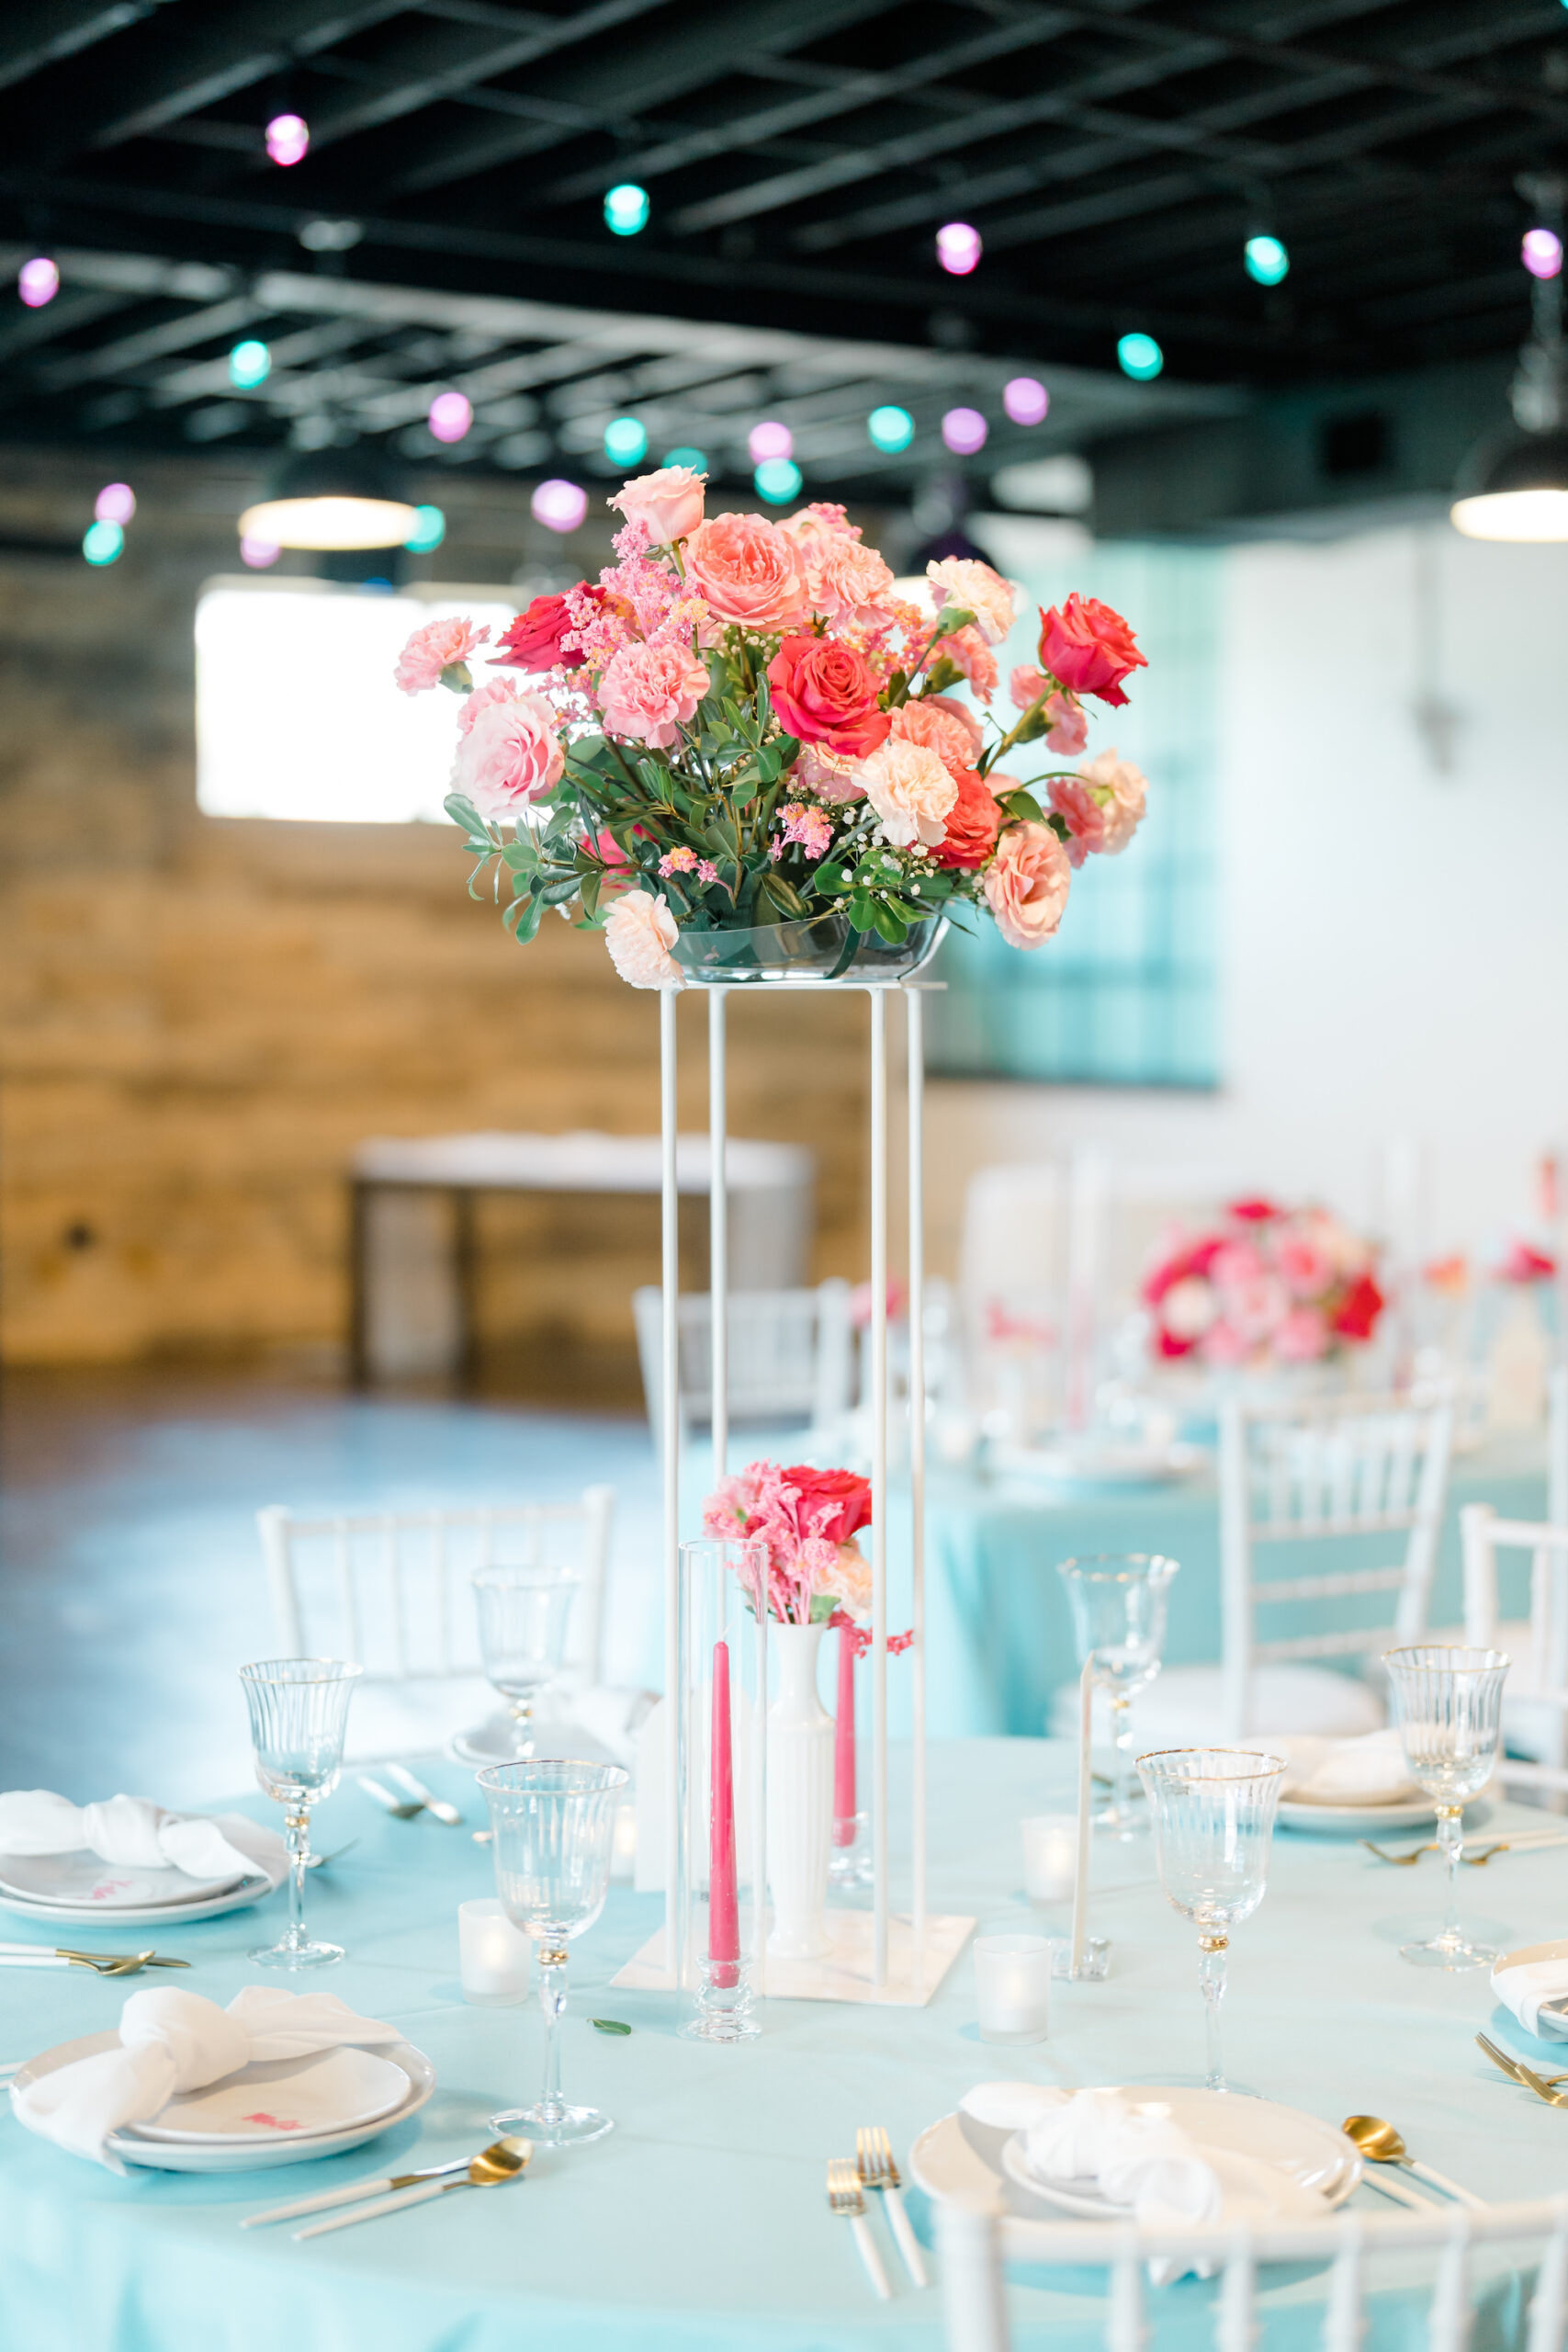 Tall Peach and Pink Roses Floral Wedding Centerpiece, Turquoise Table Linen | Tampa Bay Wedding Rentals Gabro Event Services